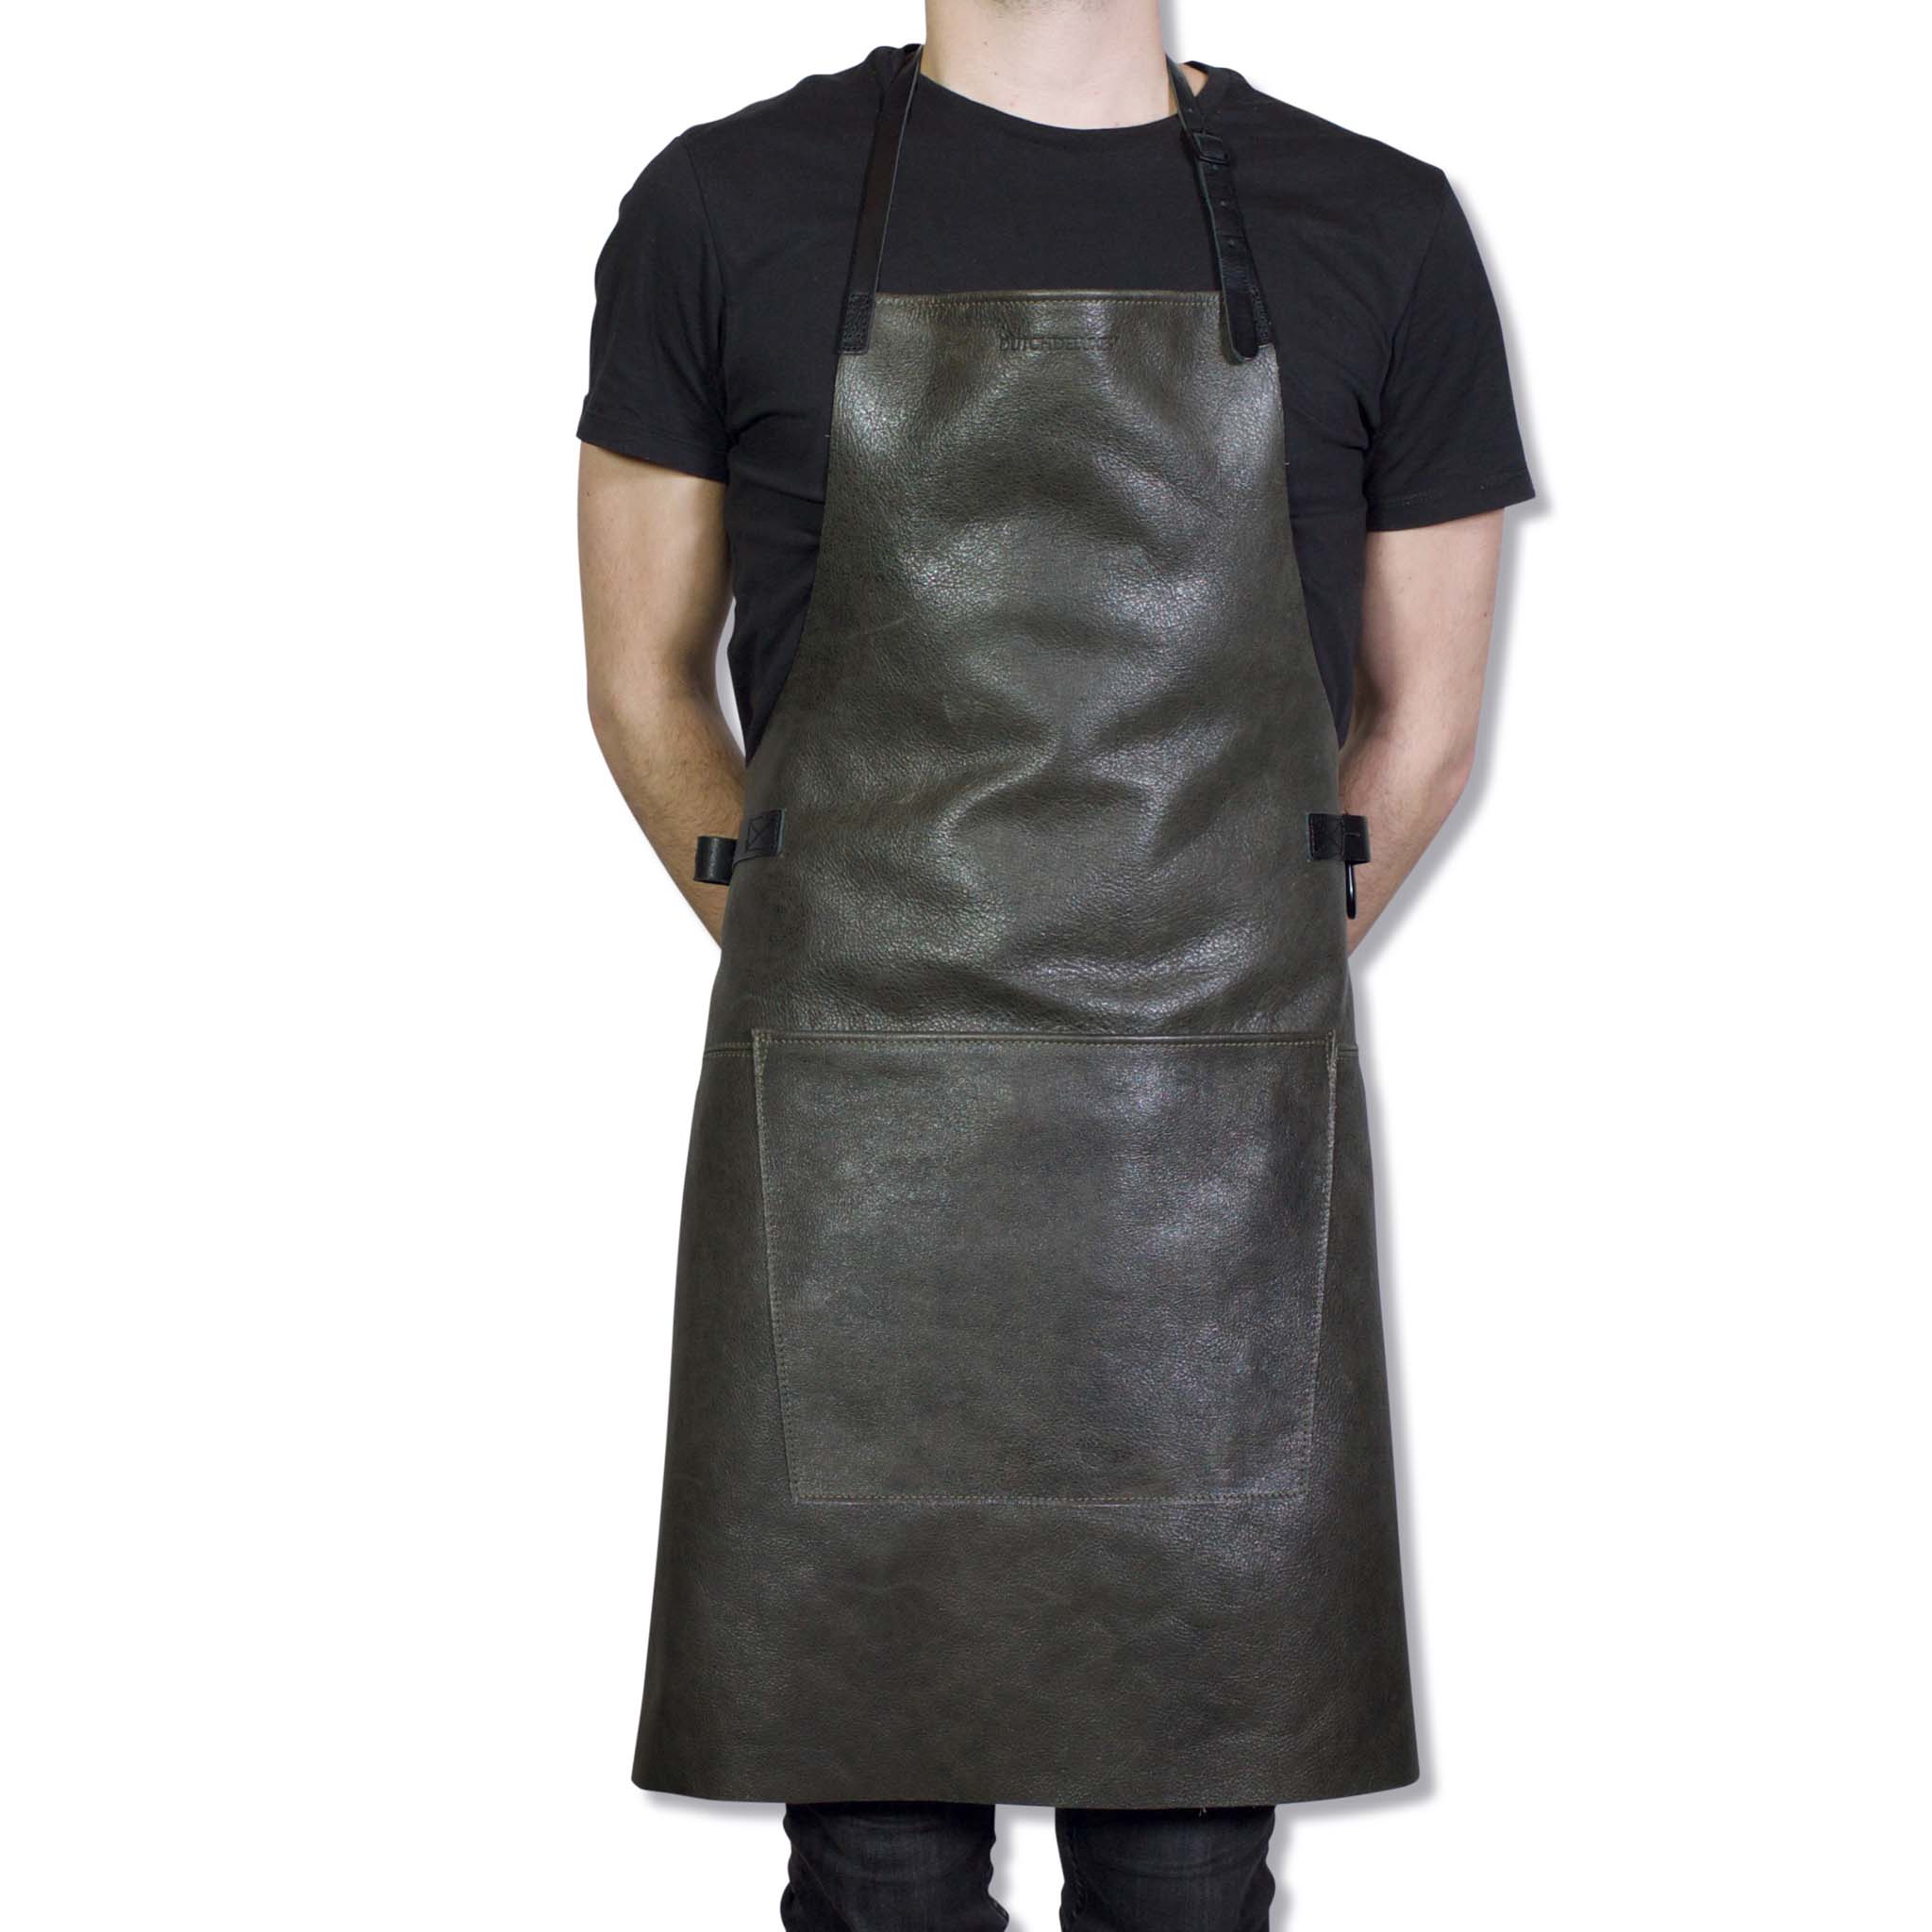 Dutchdeluxes Leather BBQ Apron in Vintage Grey Cookware Kitchen Clothing